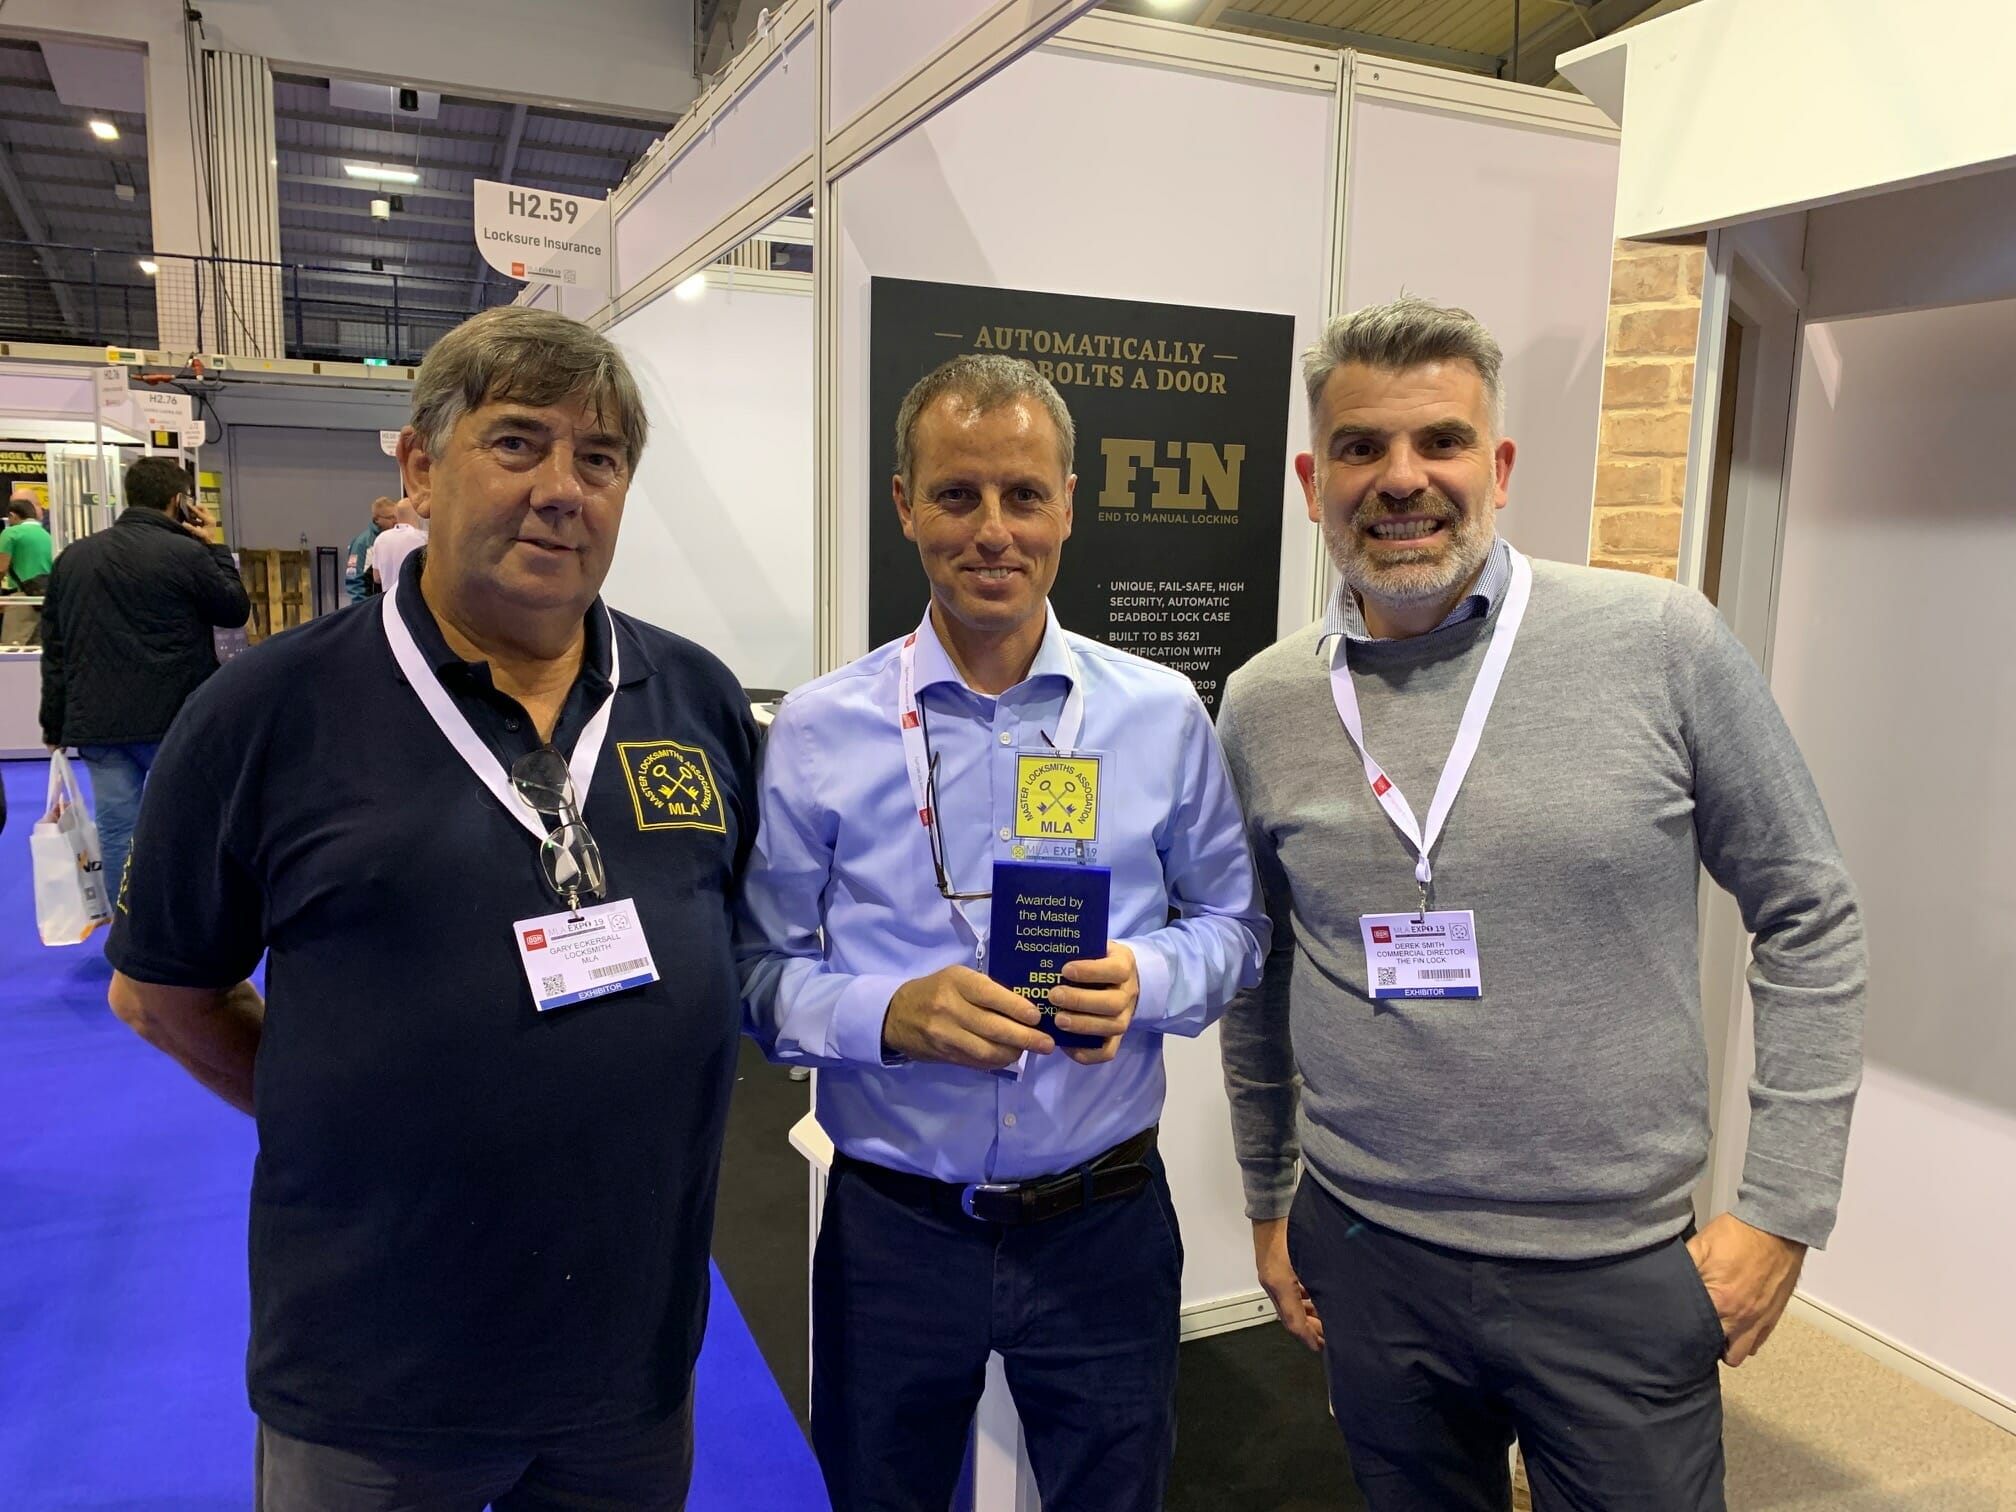 The Fin Lock - best product at MLA Expo 2019